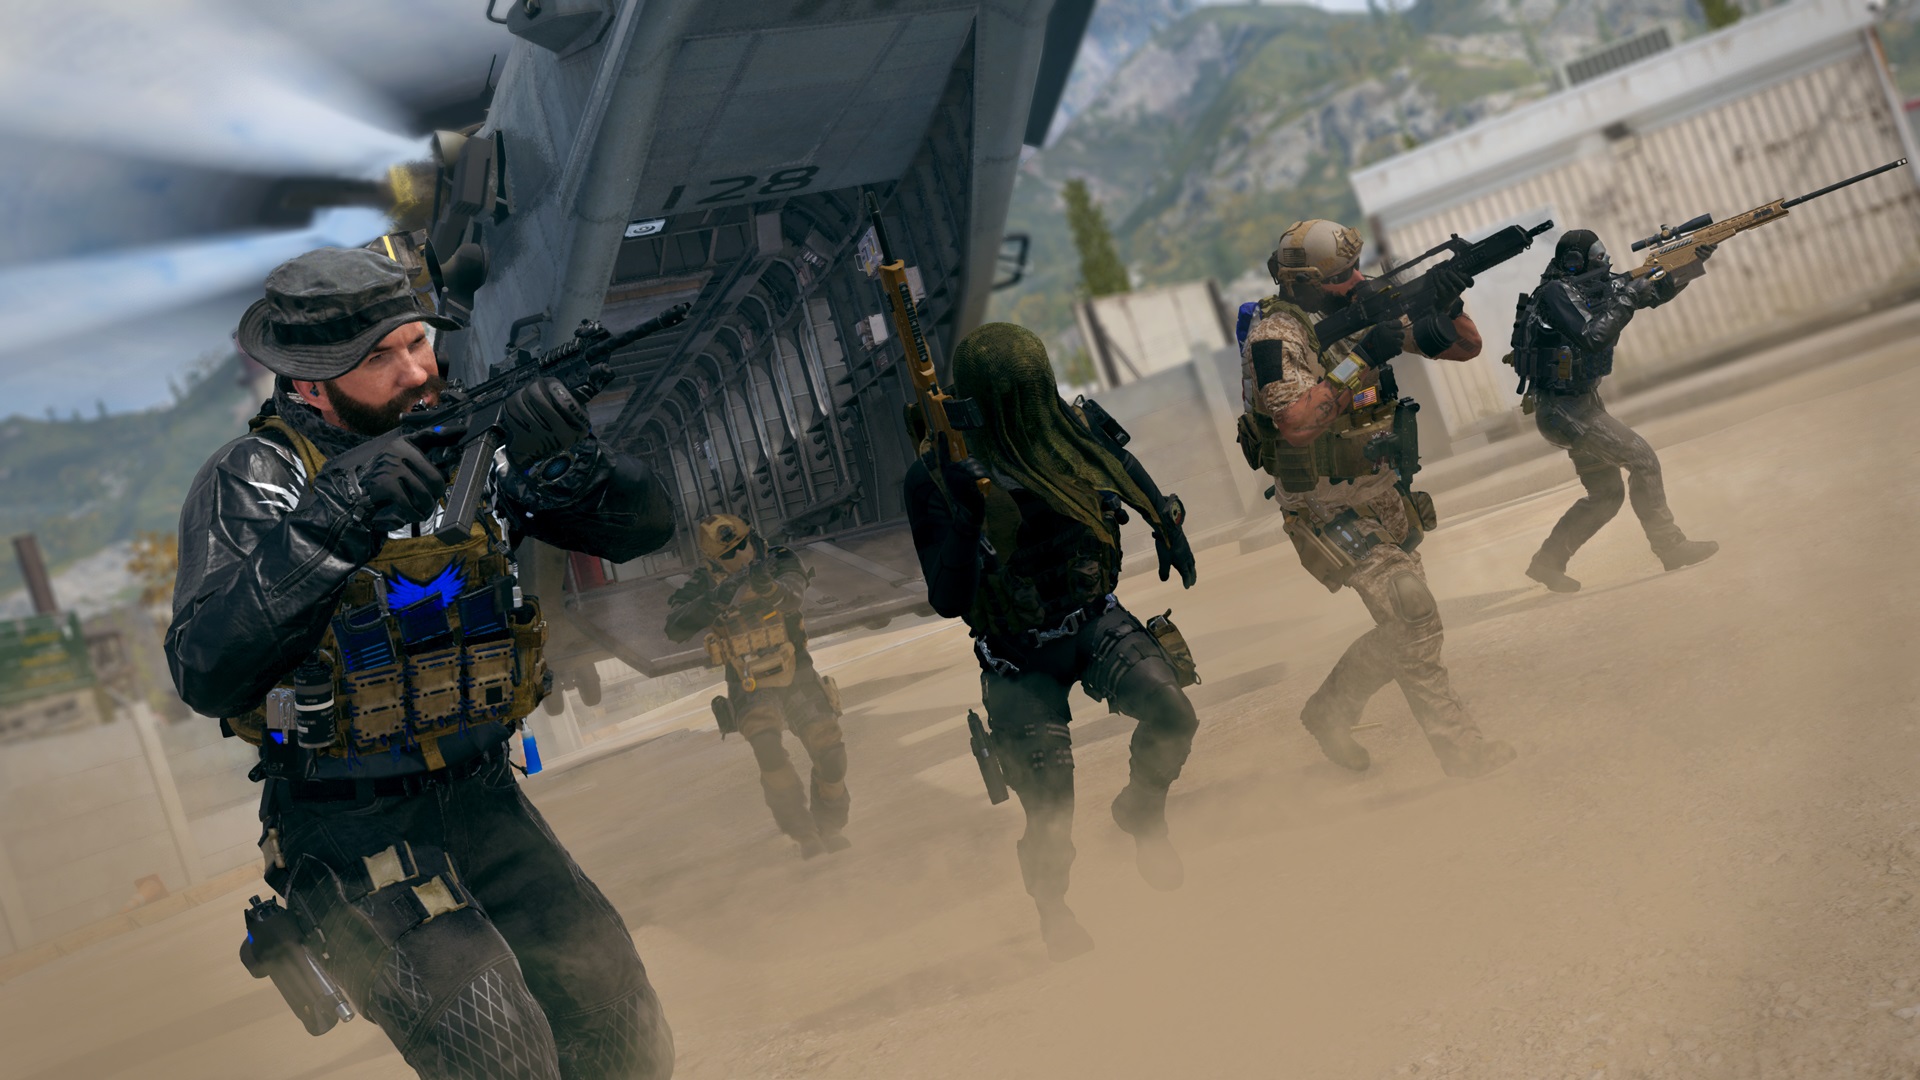 CoD Warzone 2.0: release date, start times, and new features